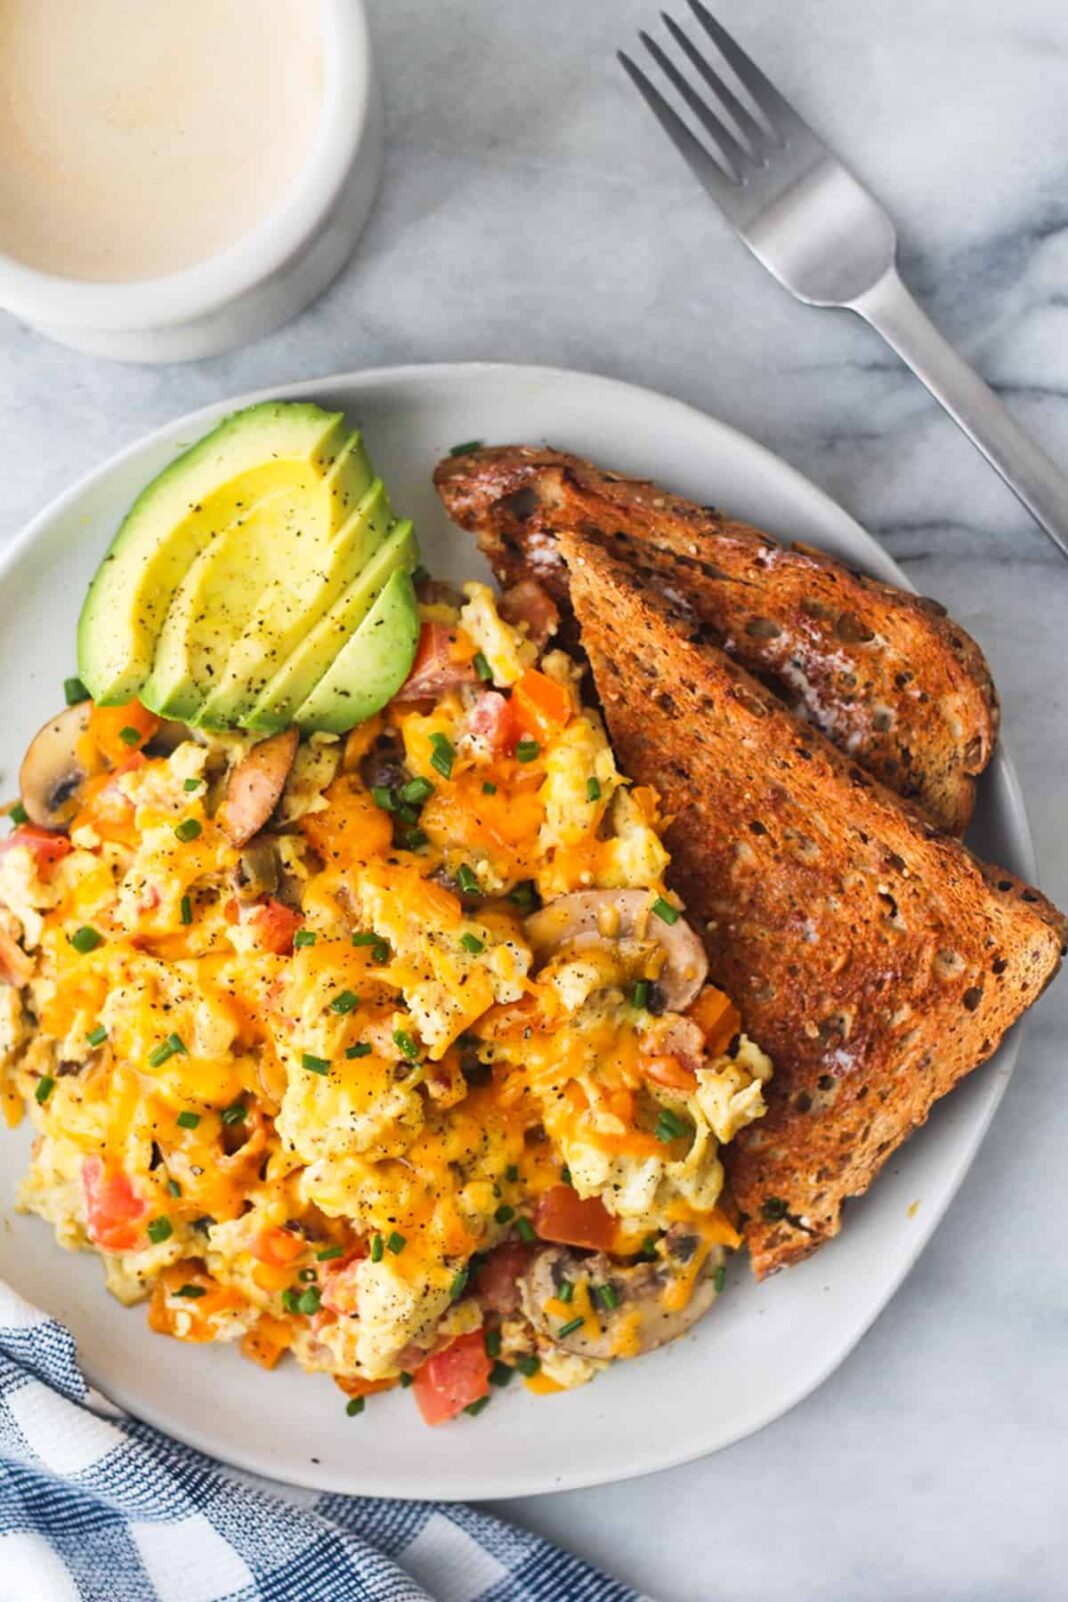 Recipes With Eggs: 20+ delicious & Fast Recipes For A Quick Meal